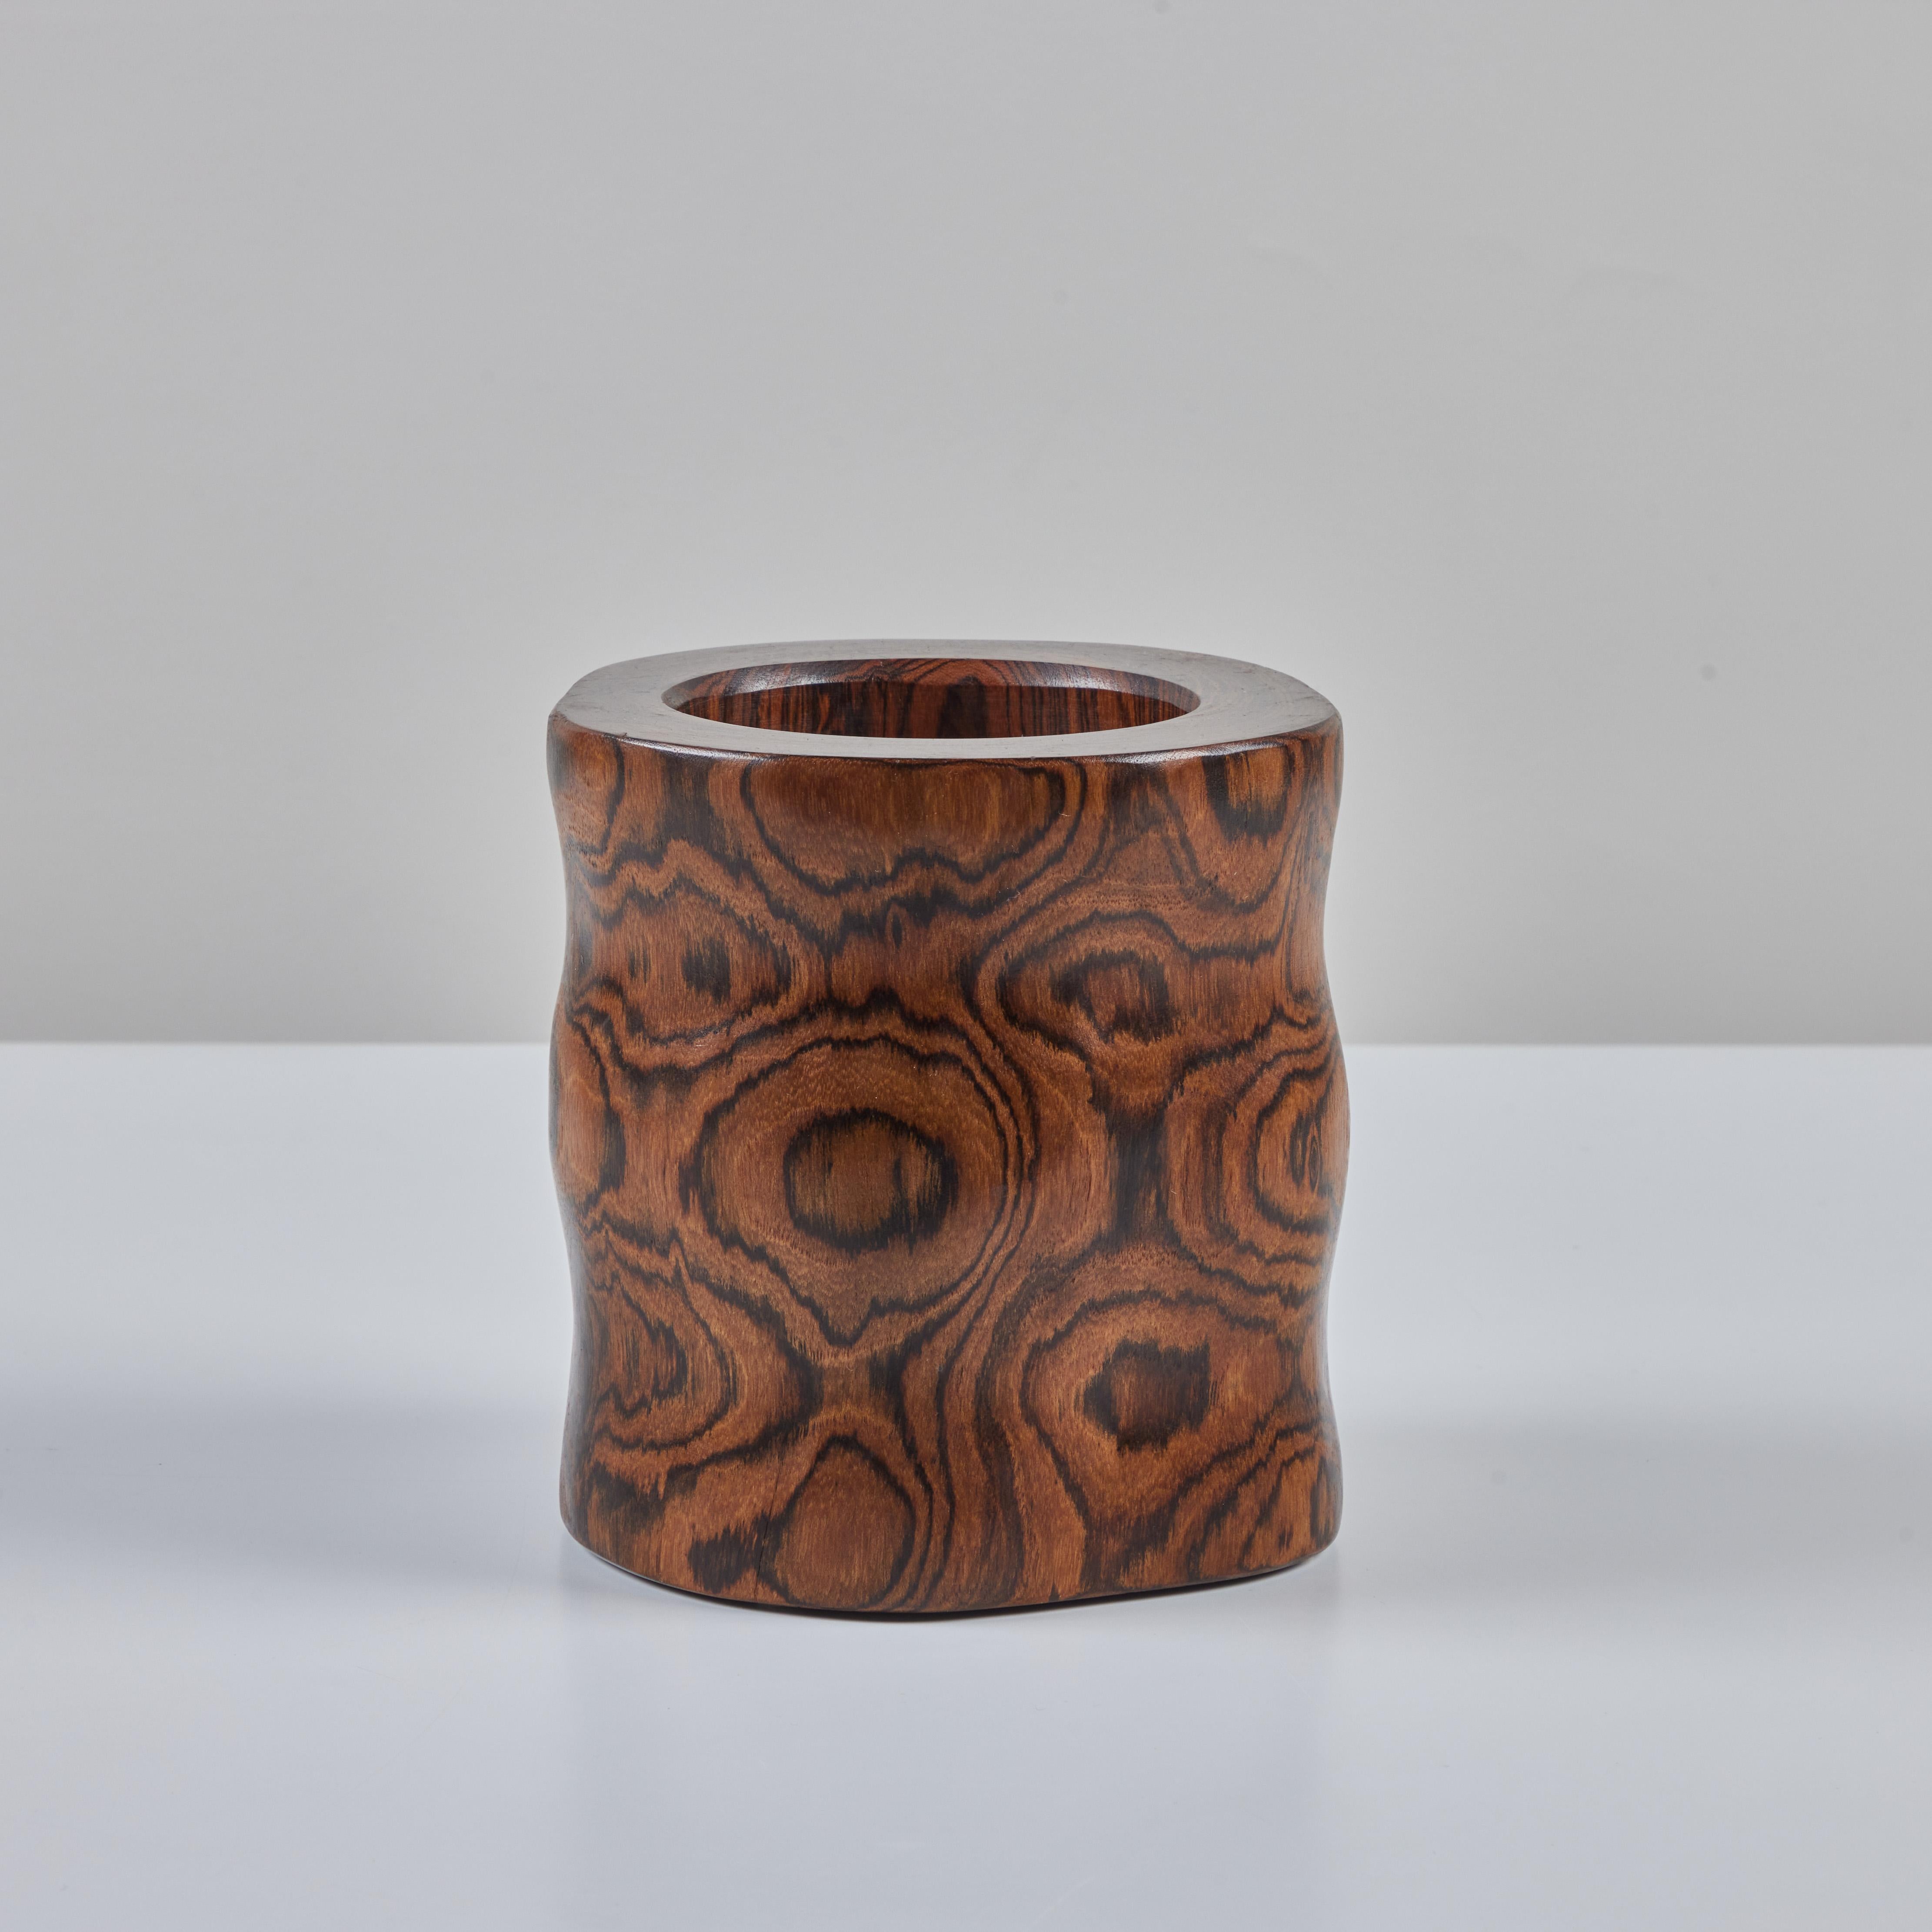 Don Shoemaker Cocobolo vessel for Señal, c.1960s, Mexico. The hand carved minimalist vessel features a rippled body with soft rounded edges and an eye catching wood grain.

CITES Notice: Due to stringent regulations on the export of rosewood